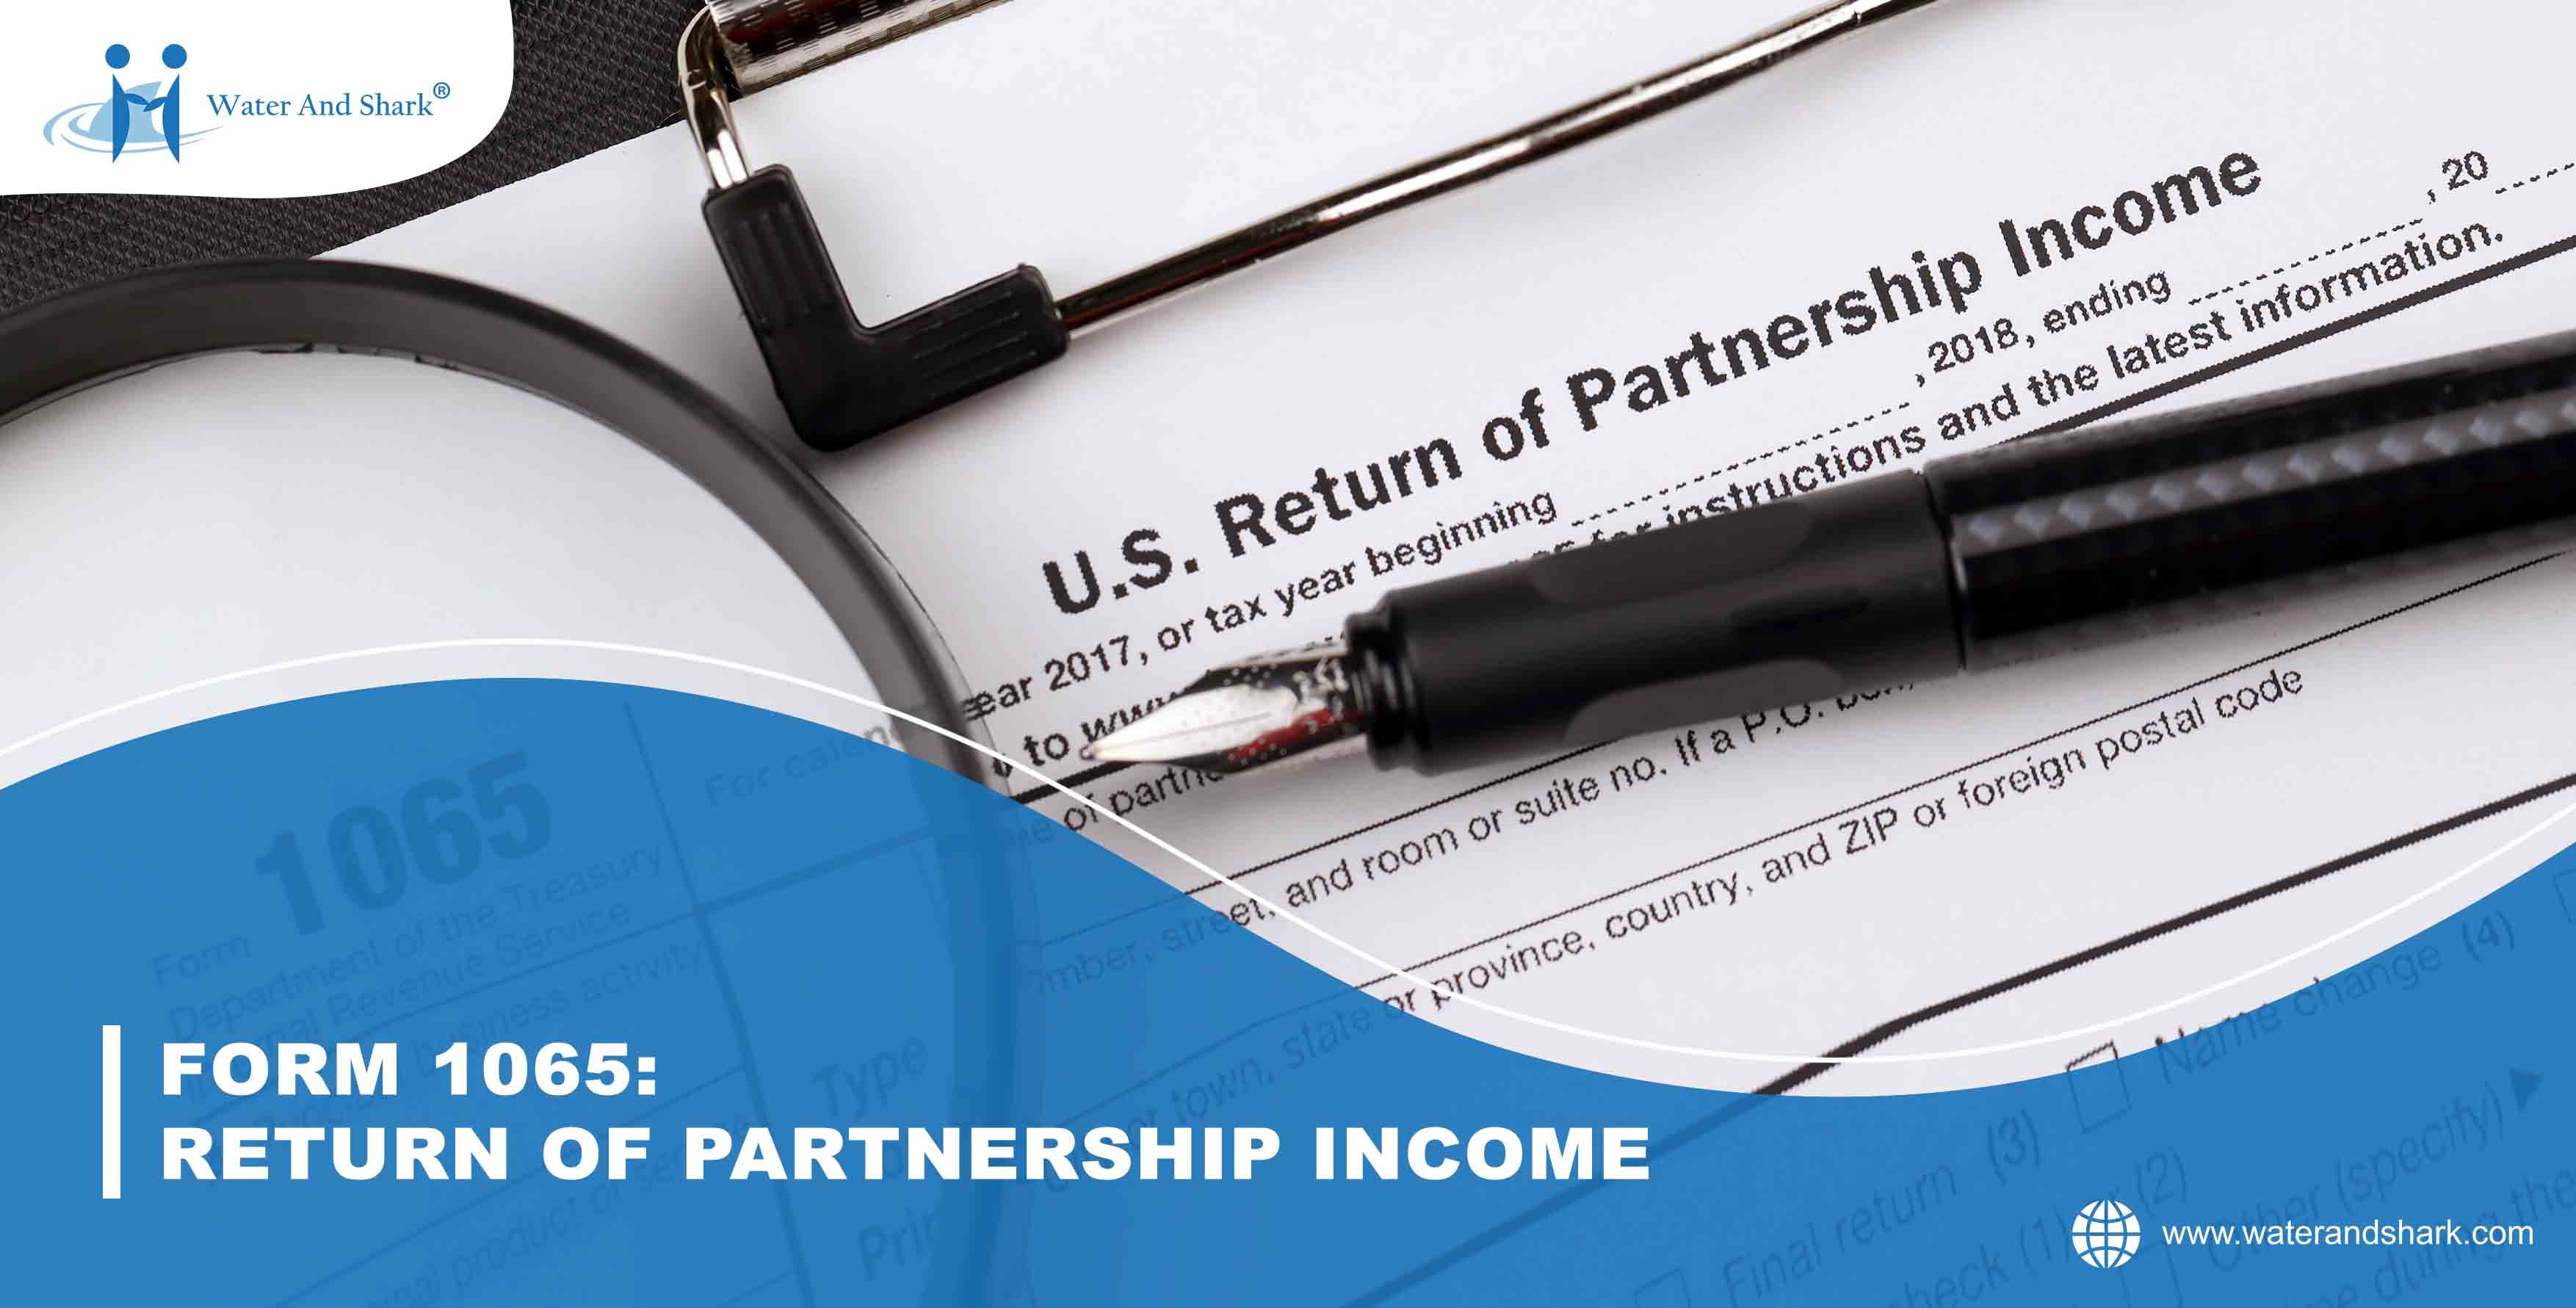 650x1280_FORM_1065_RETURN_OF_PARTNERSHIP_INCOME_low_size.jpg